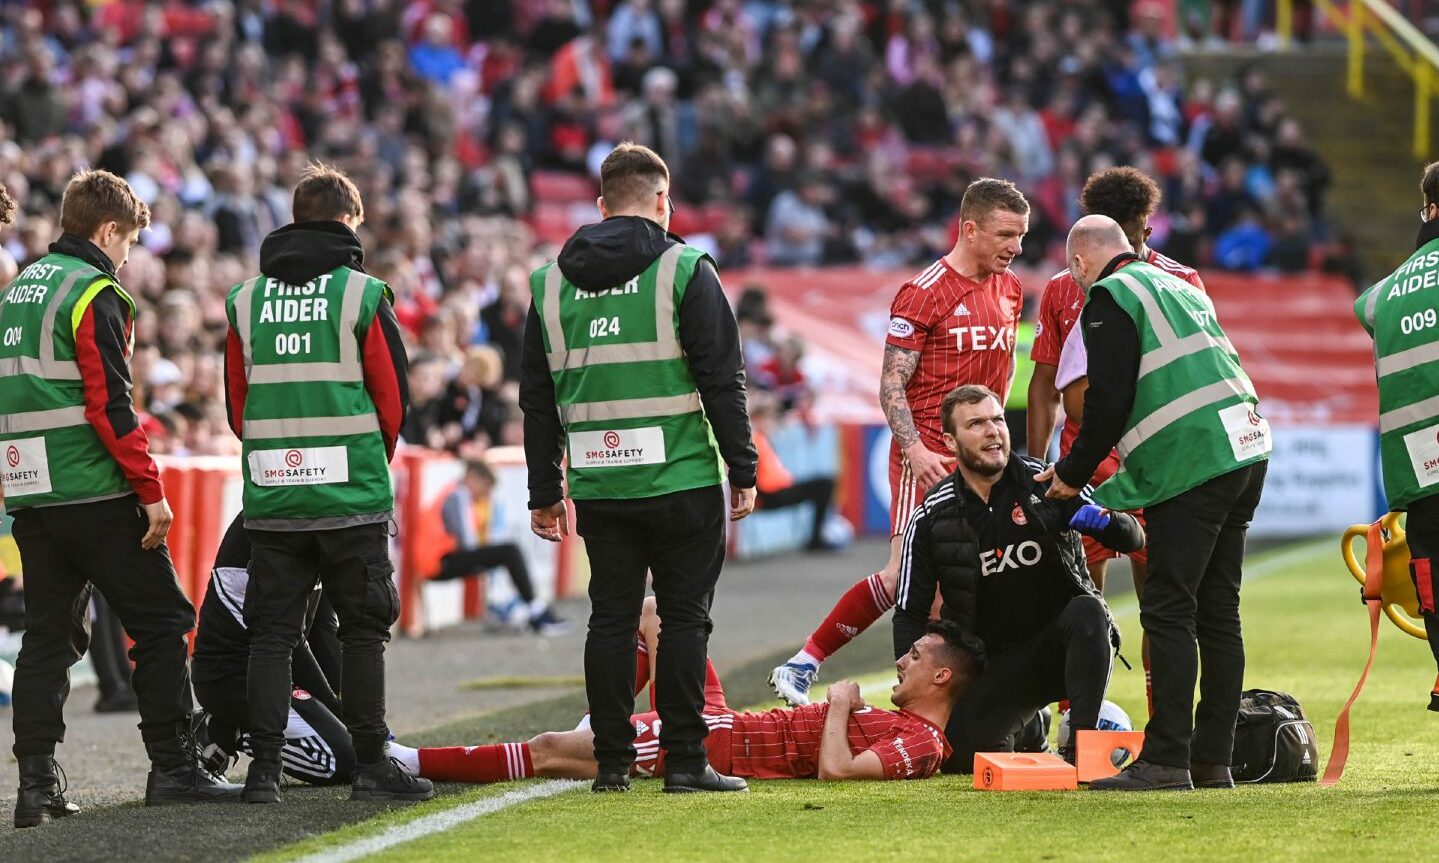 First aiders and other Aberdeen players gathered around Bojan Miovski lying at t side of the pitch after an injury